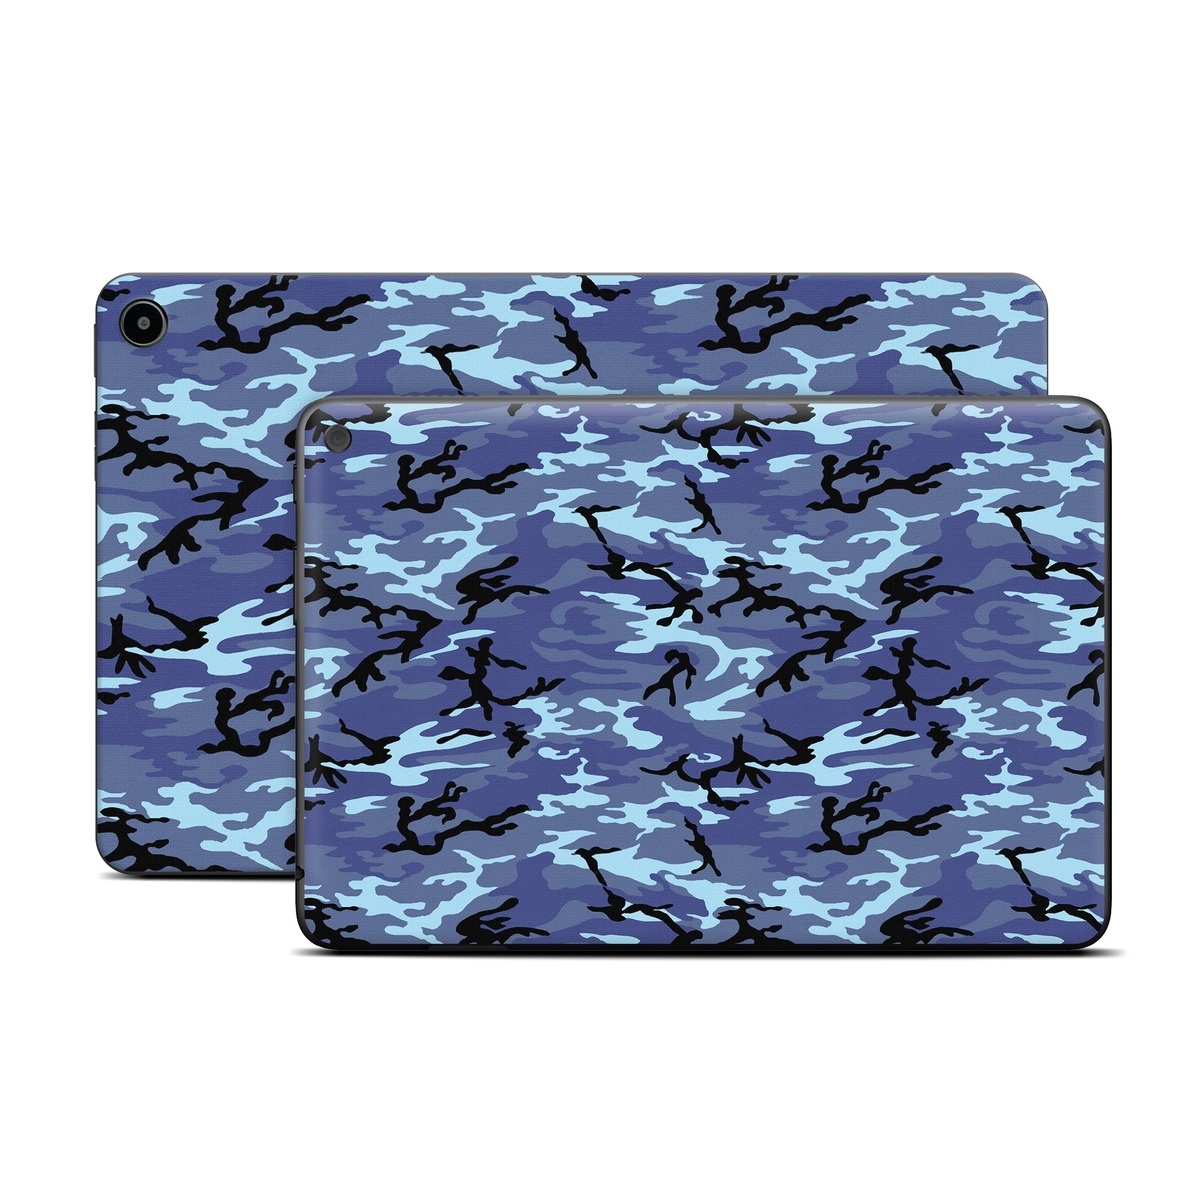 Amazon Fire Tablet Series Skin Skin design of Military camouflage, Pattern, Blue, Aqua, Teal, Design, Camouflage, Textile, Uniform, with blue, black, gray, purple colors